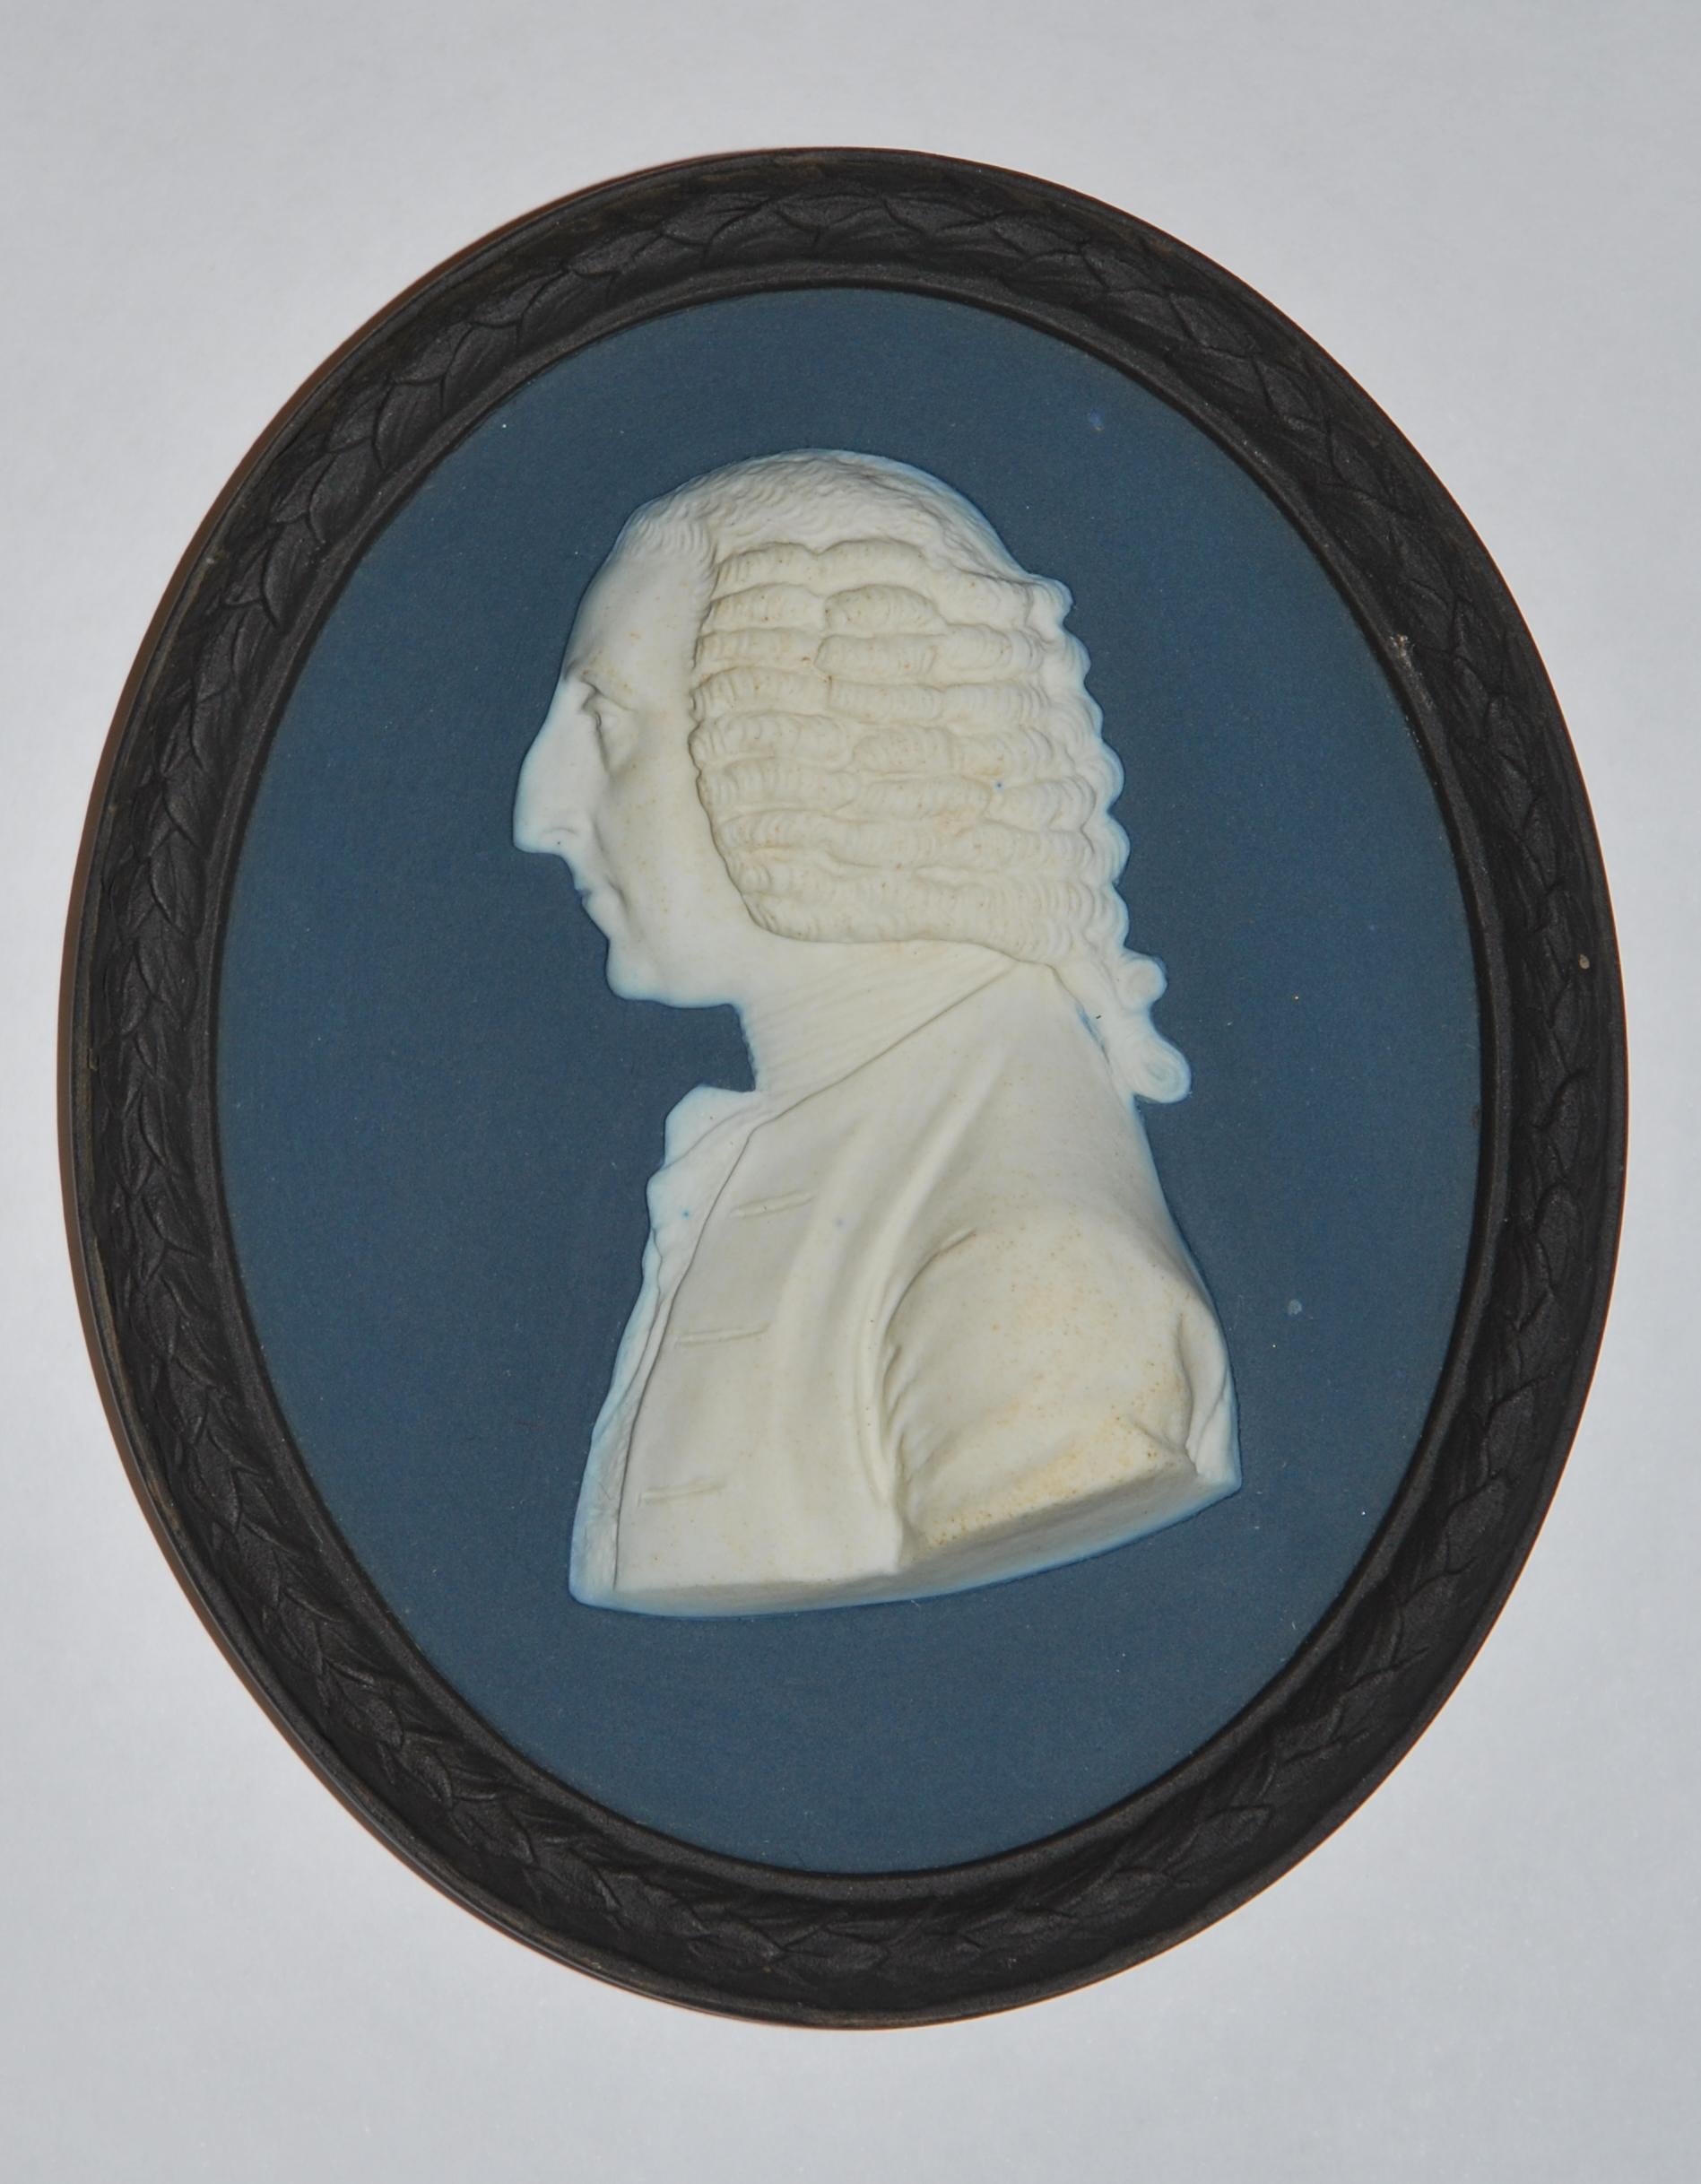 A fine tricolour portrait medallion of the First Earl of Chatham (1708-1778), a Whig statesman who led Britain during the Seven Years’ War. 

Ornamented by Bert Bentley, one of Wedgwood's best decorators. Bentley went through the vault, and made